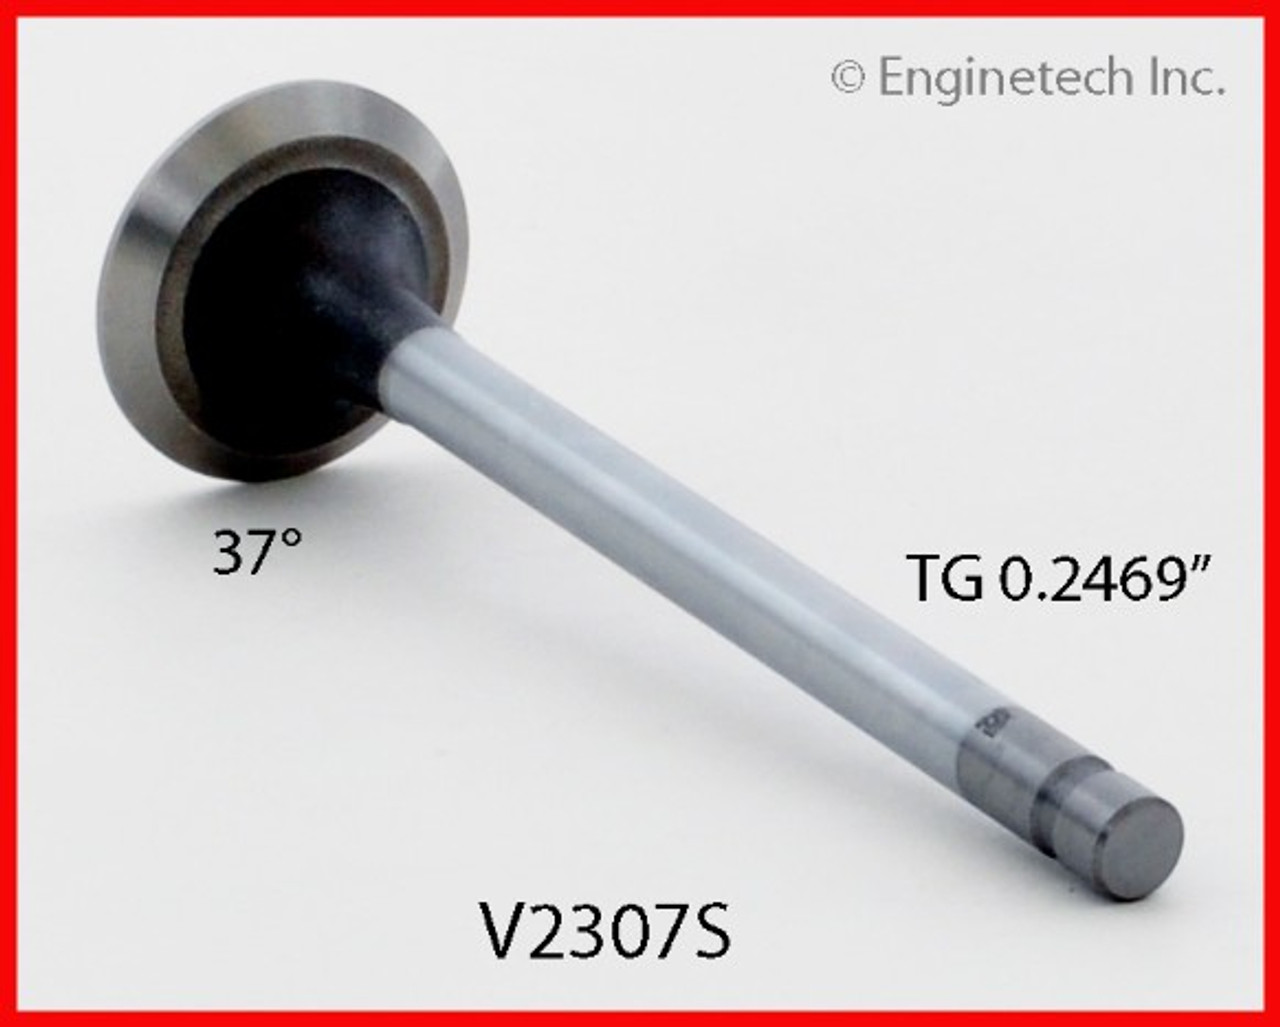 Exhaust Valve - 1990 Ford F-250 7.3L (V2307S.D40)